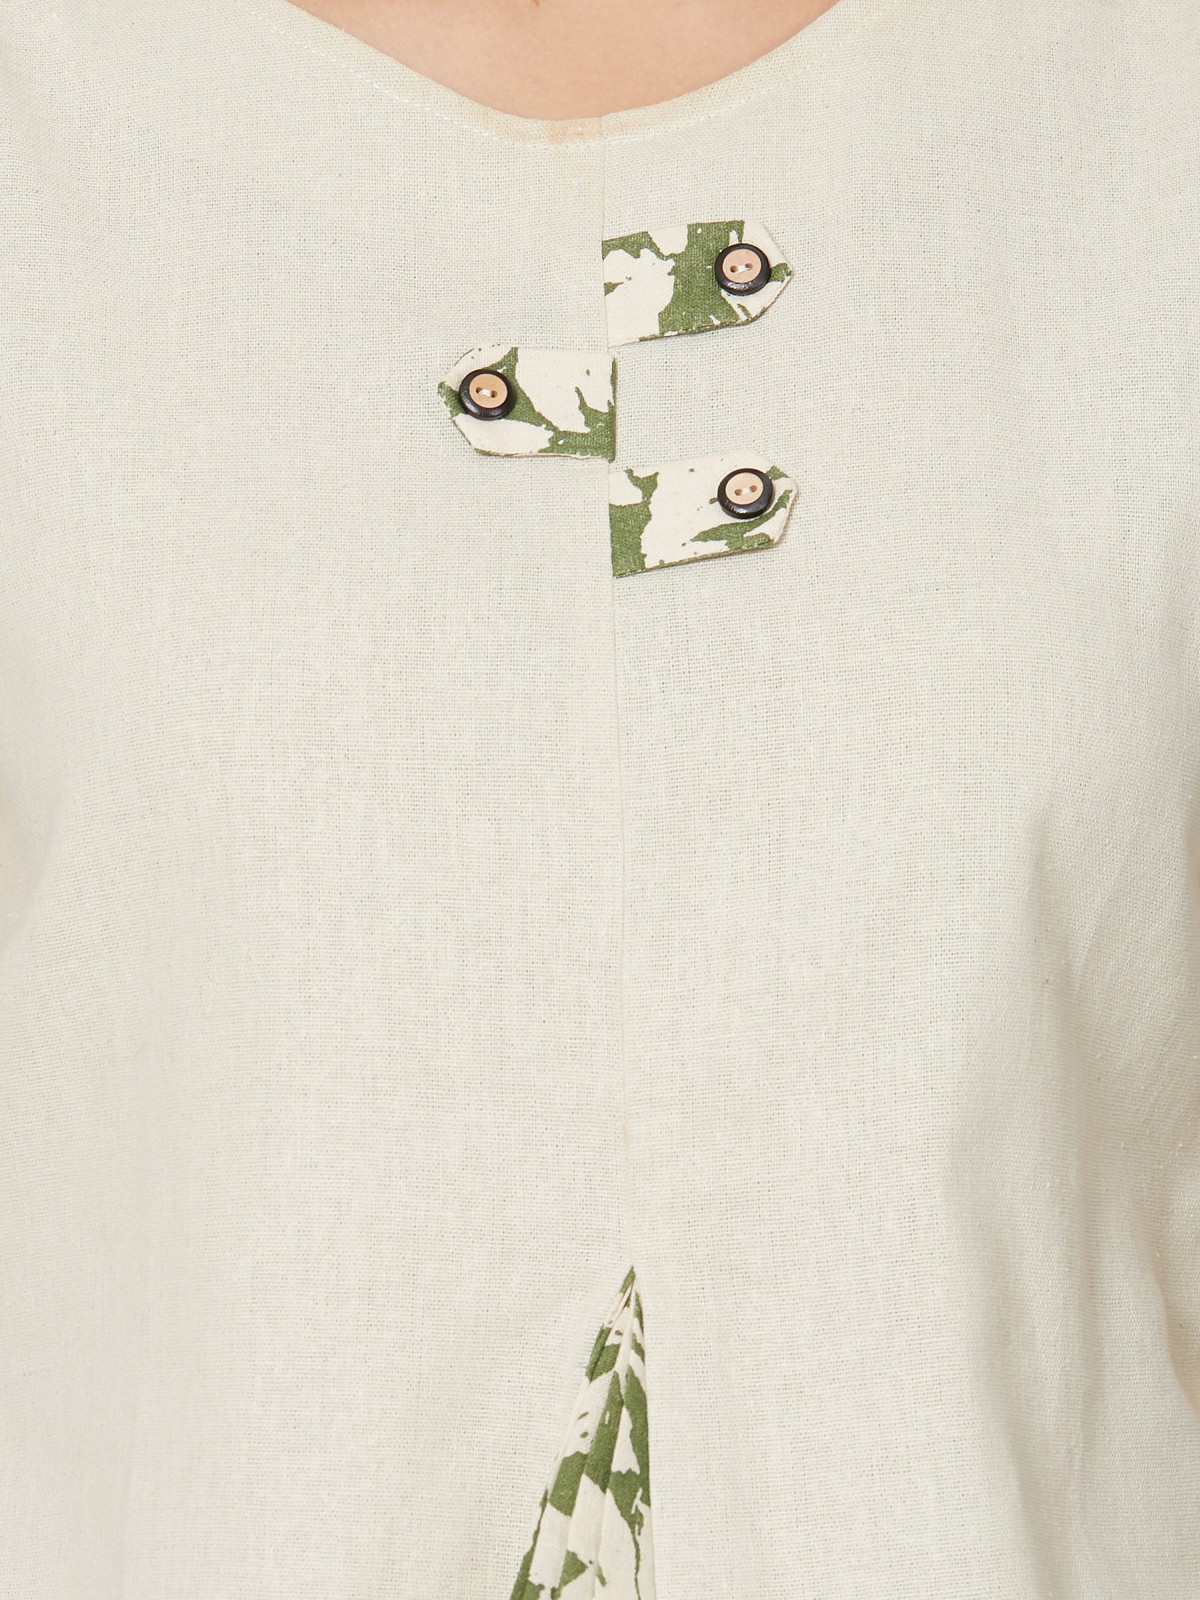  Exclusive Cotton Stylish Beige Green Floral Printed Top